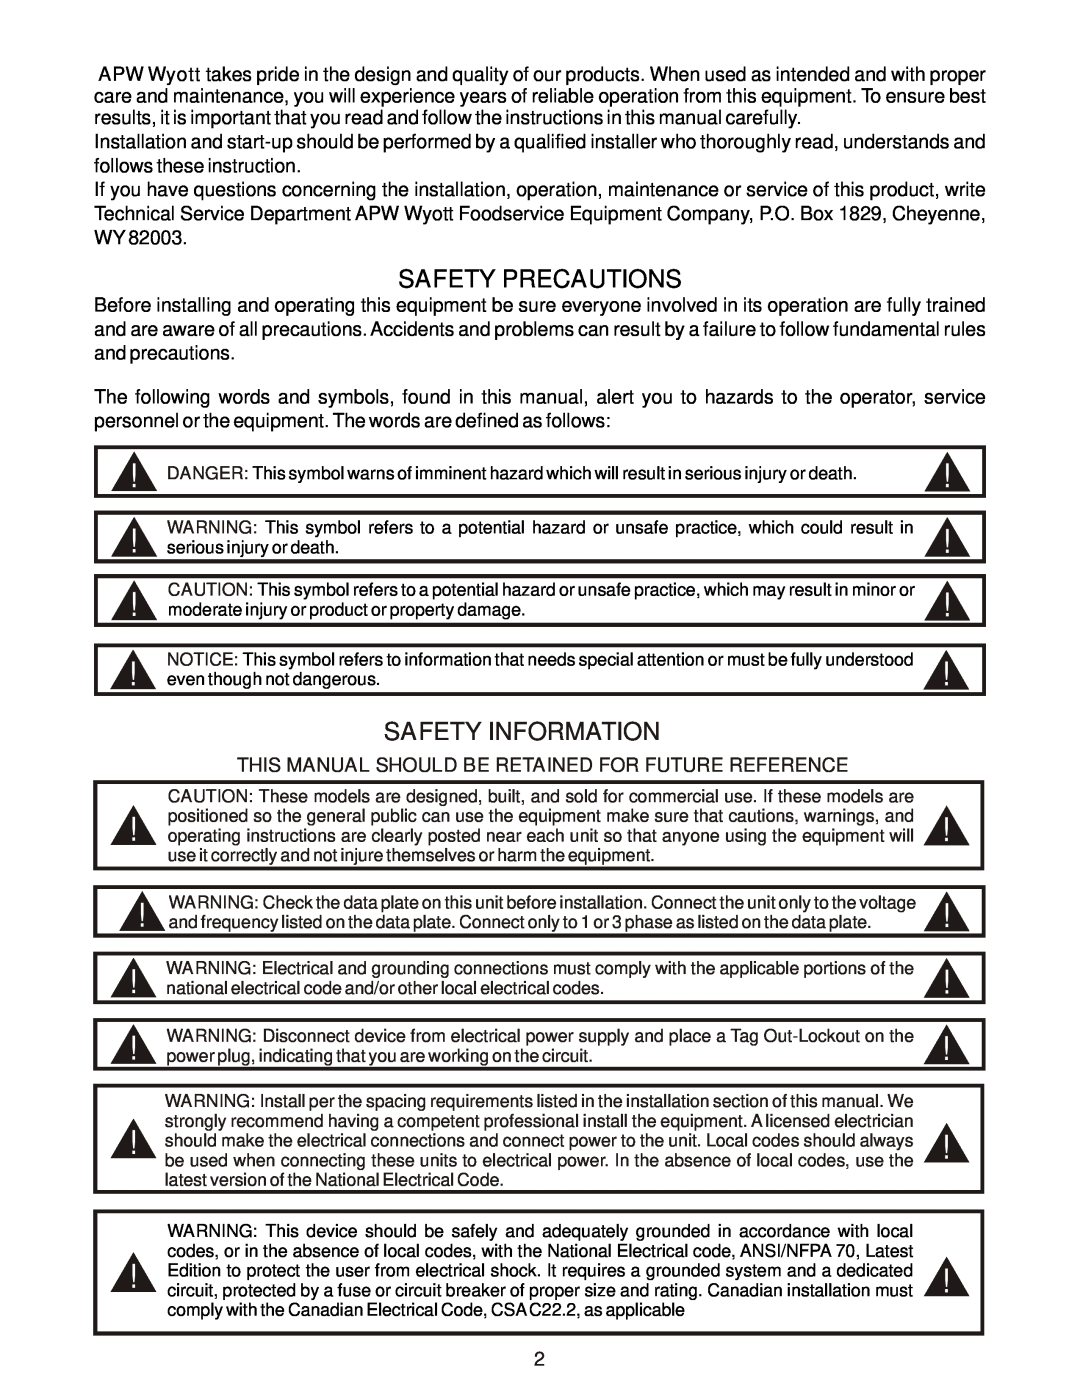 APW Wyott EF-30 Safety Precautions, Safety Information, This Manual Should Be Retained For Future Reference 